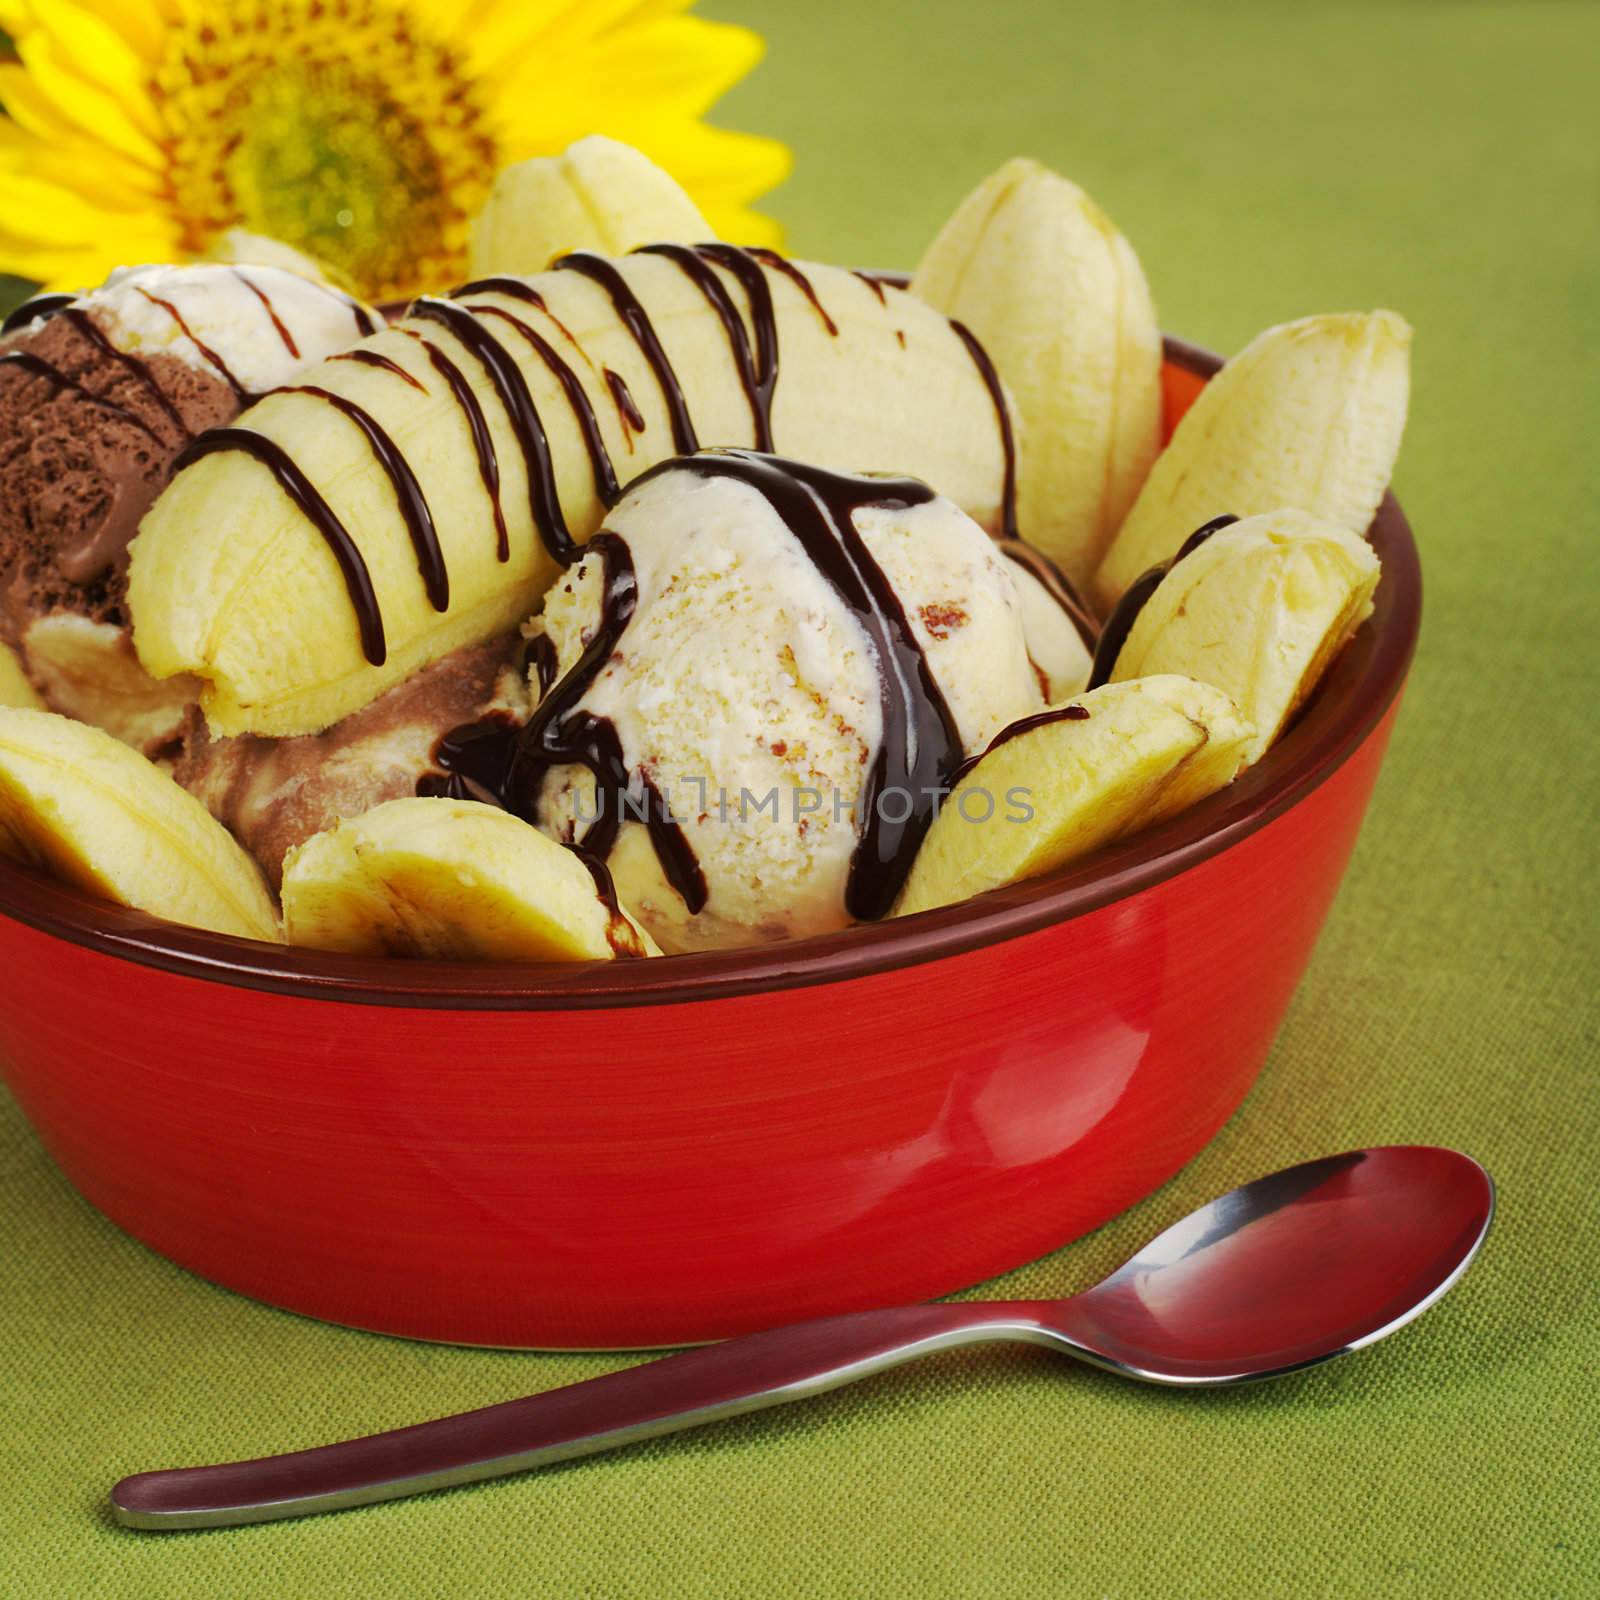 Dessert: Banana split in red bowl with spoon on green table mat and sunflower in the back ground (Selective Focus)